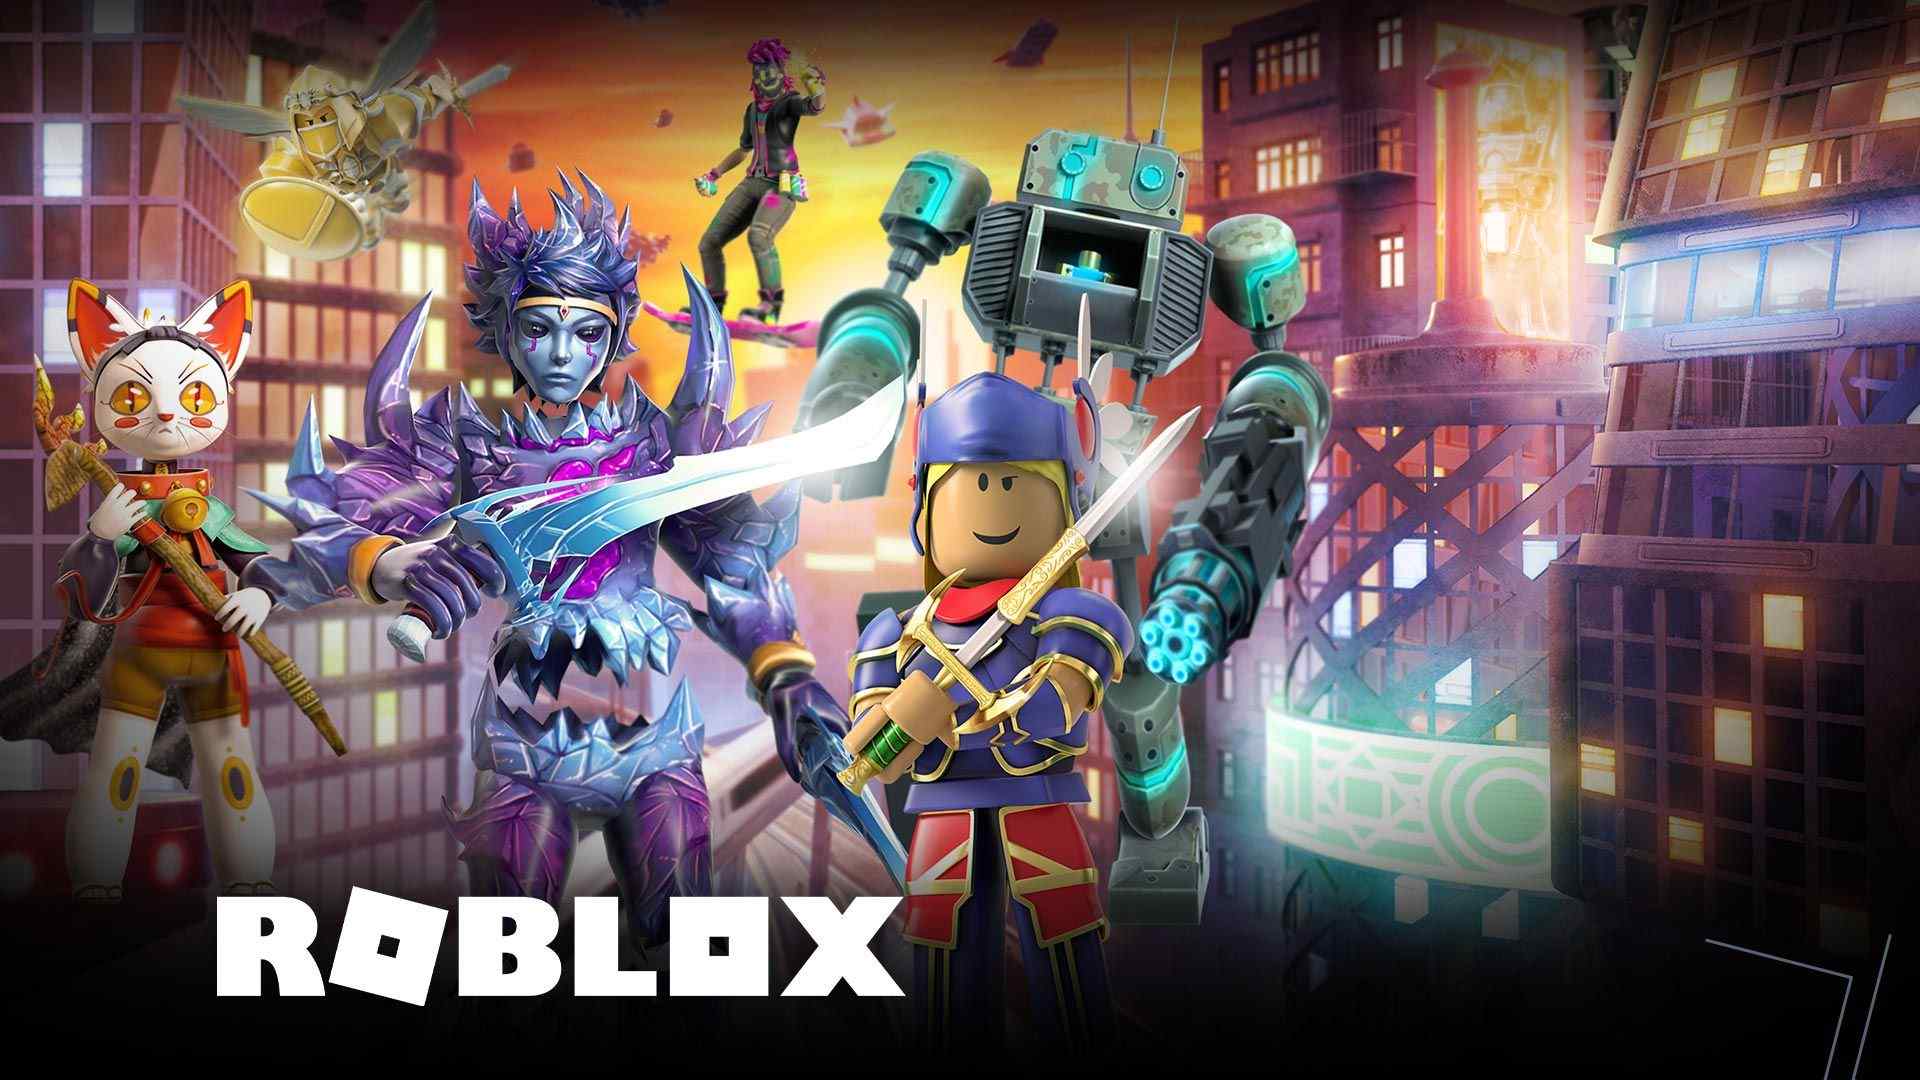 Wallpaper Roblox Game on the desktop / interface personalization (20+)